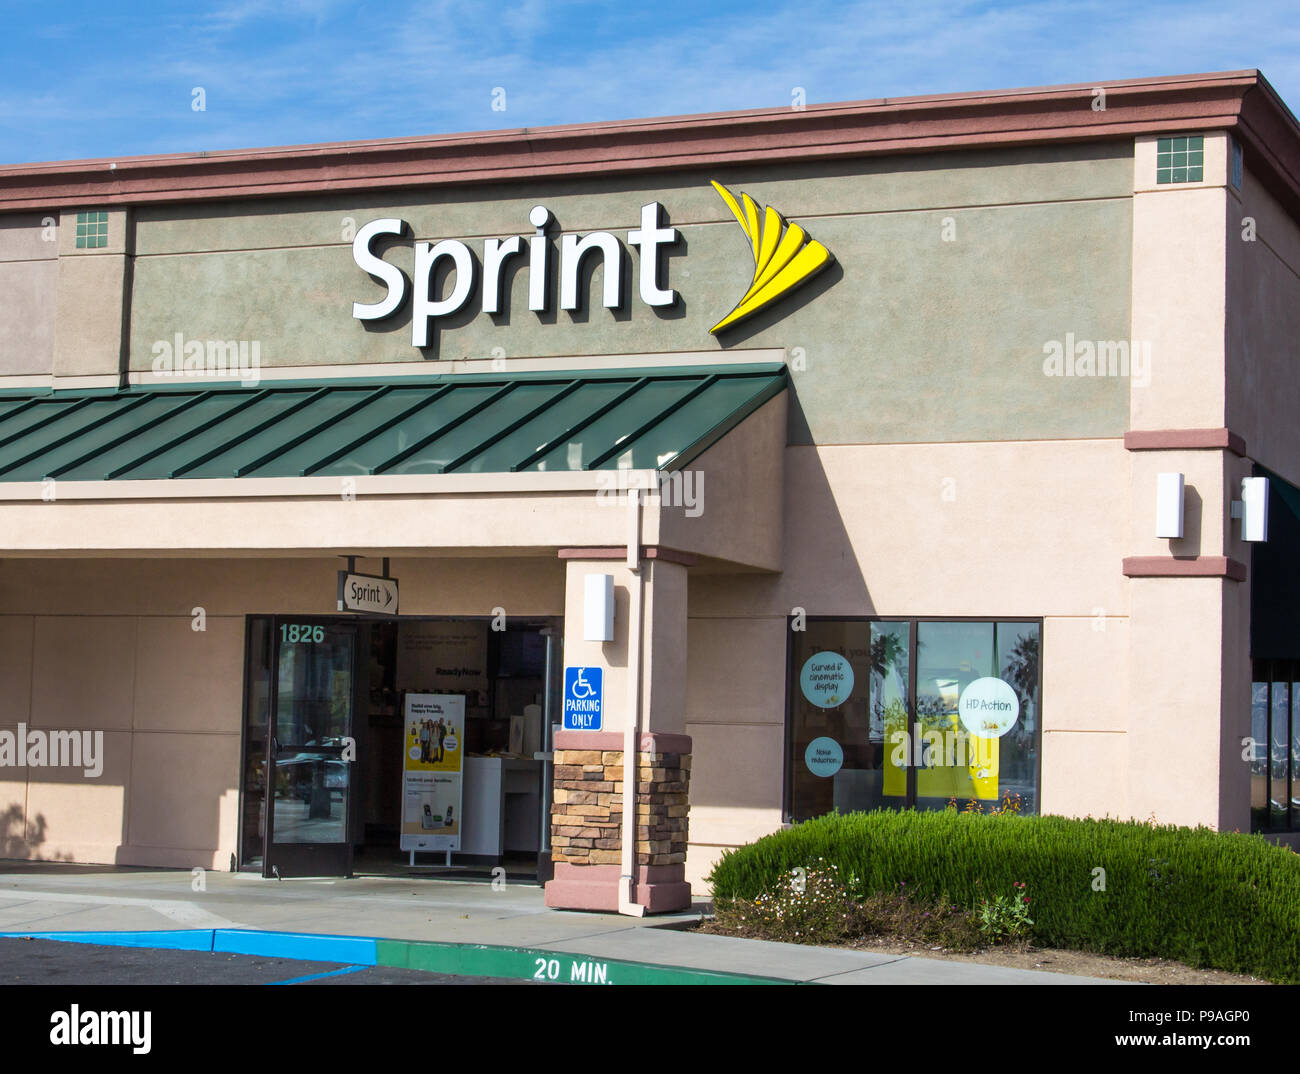 SALINAS, CA/USA - APRIL 8, 2104: Sprint store exterior. Sprint is a United States telecommunications holding company. Stock Photo